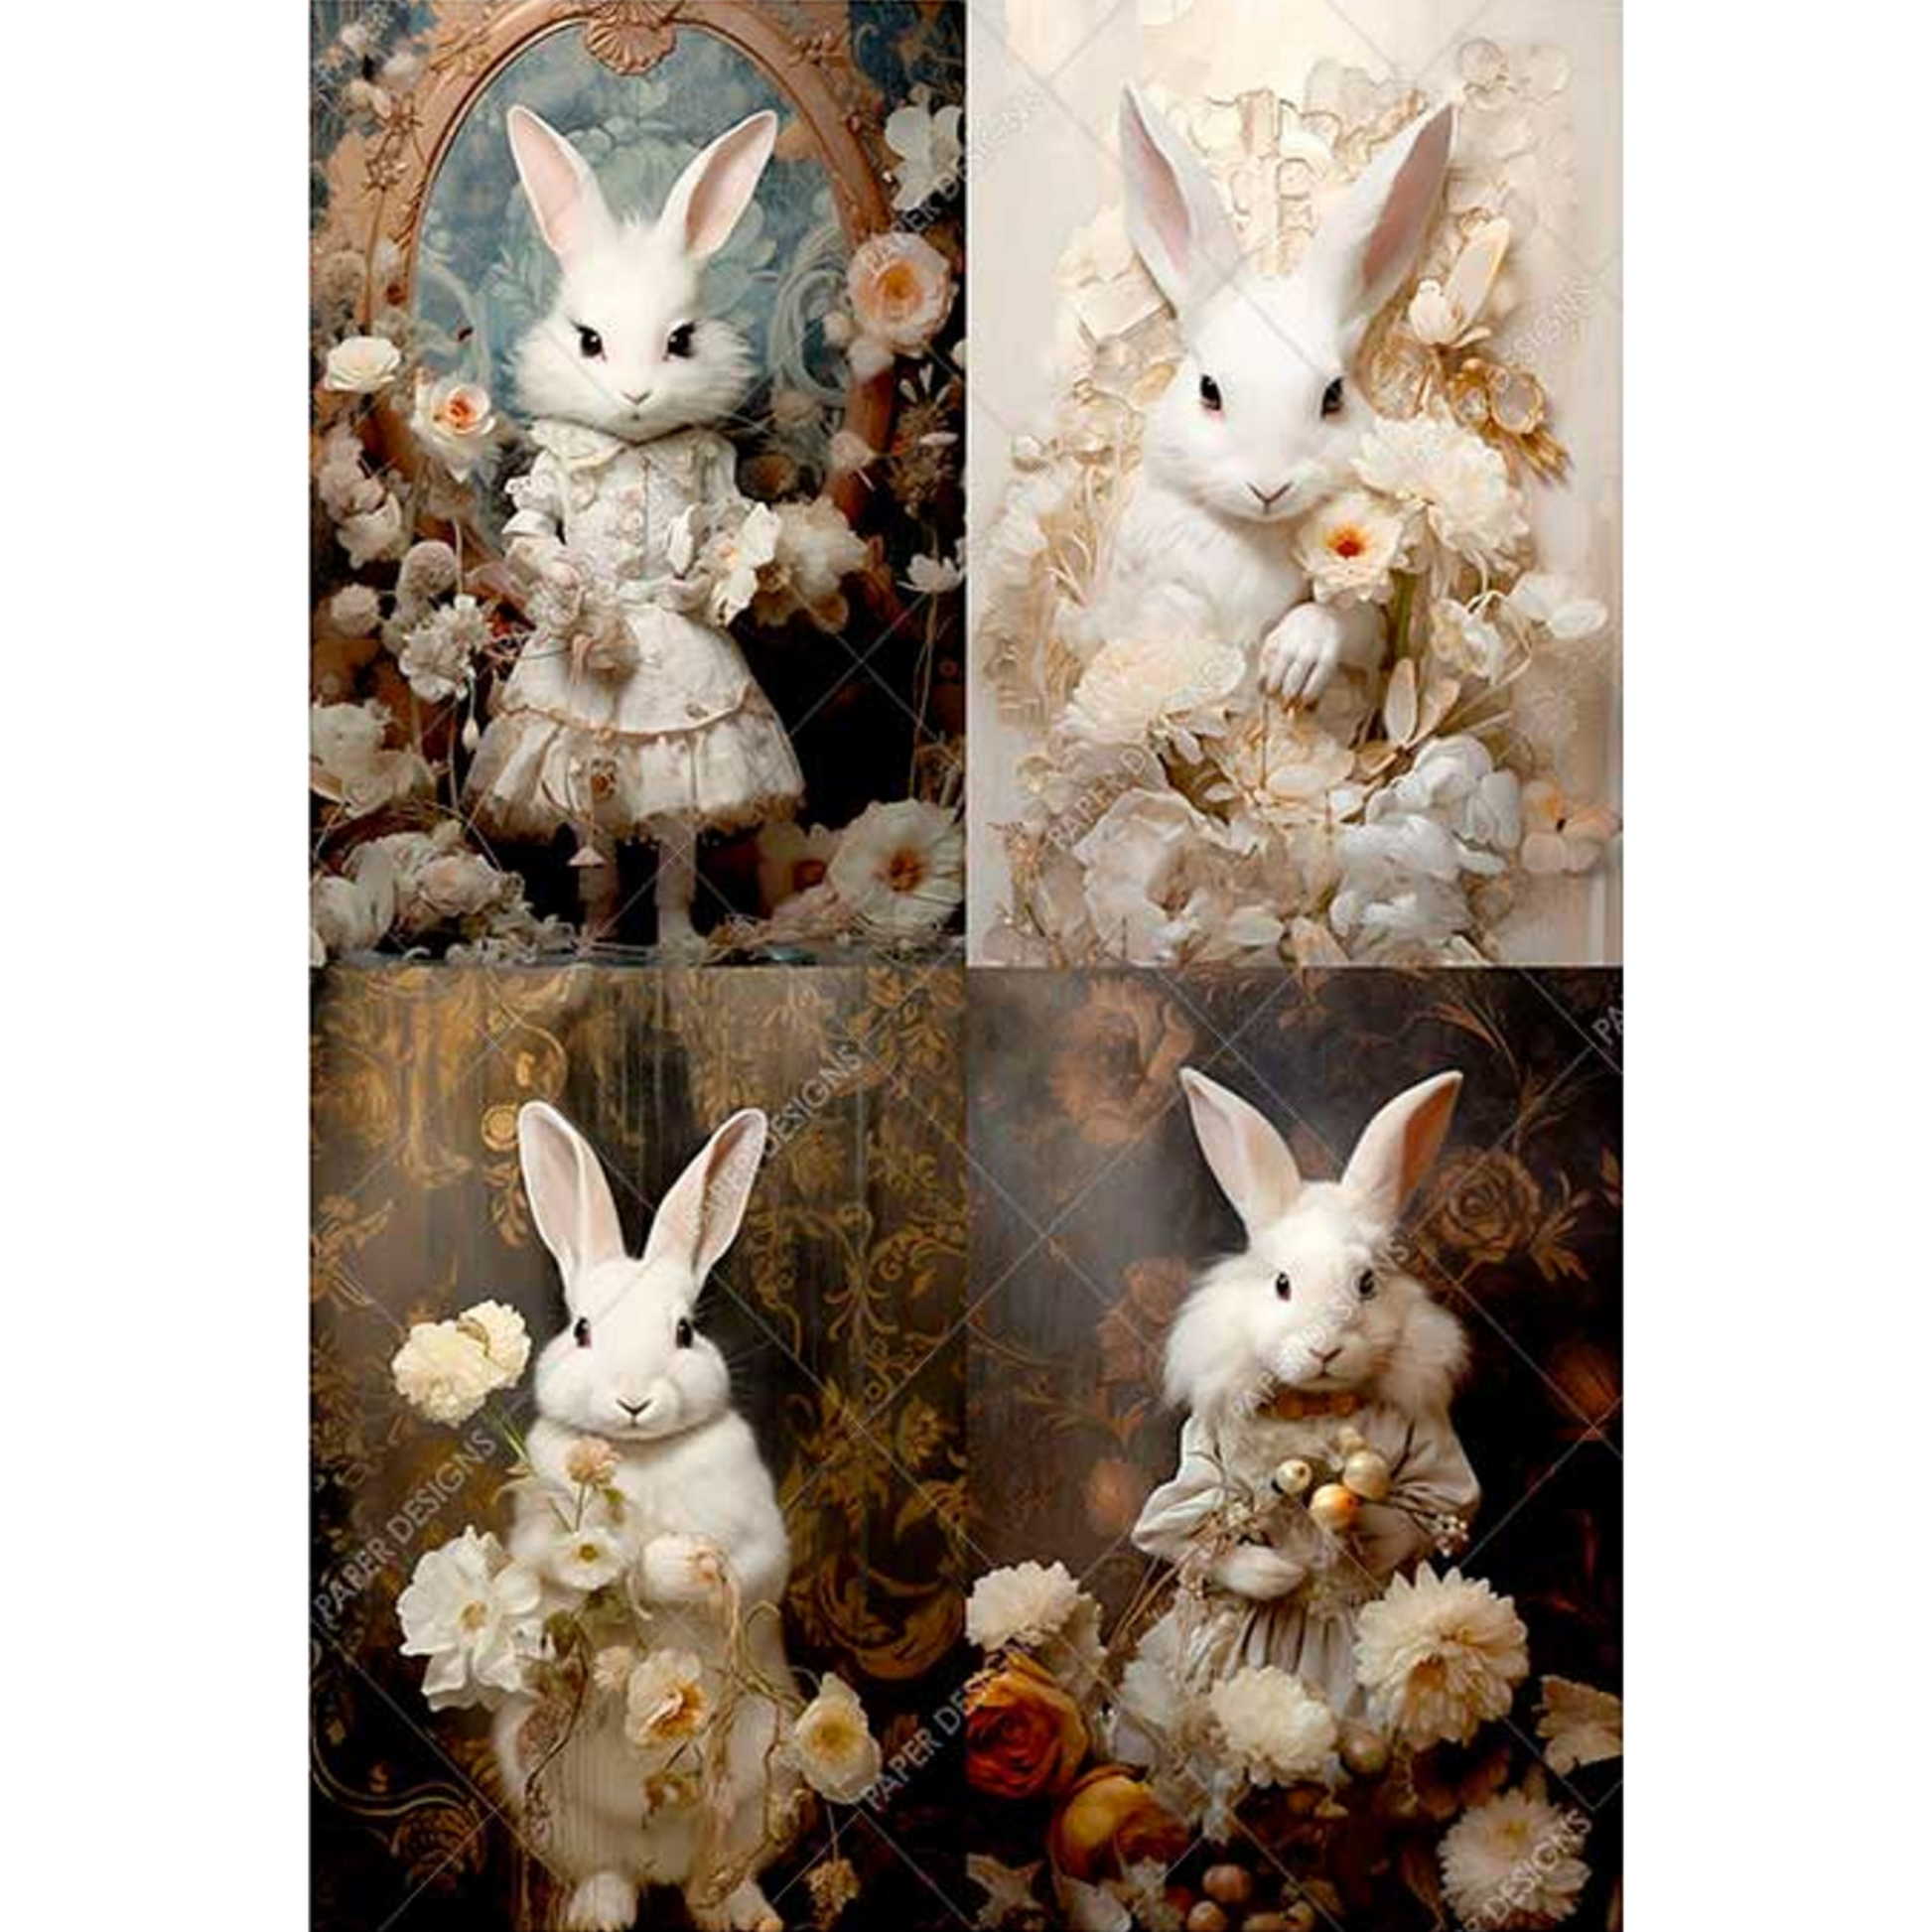 "Four Victorian Bunny Portraits" decoupage rice paper by Paper Designs. Available at Milton's Daughter.